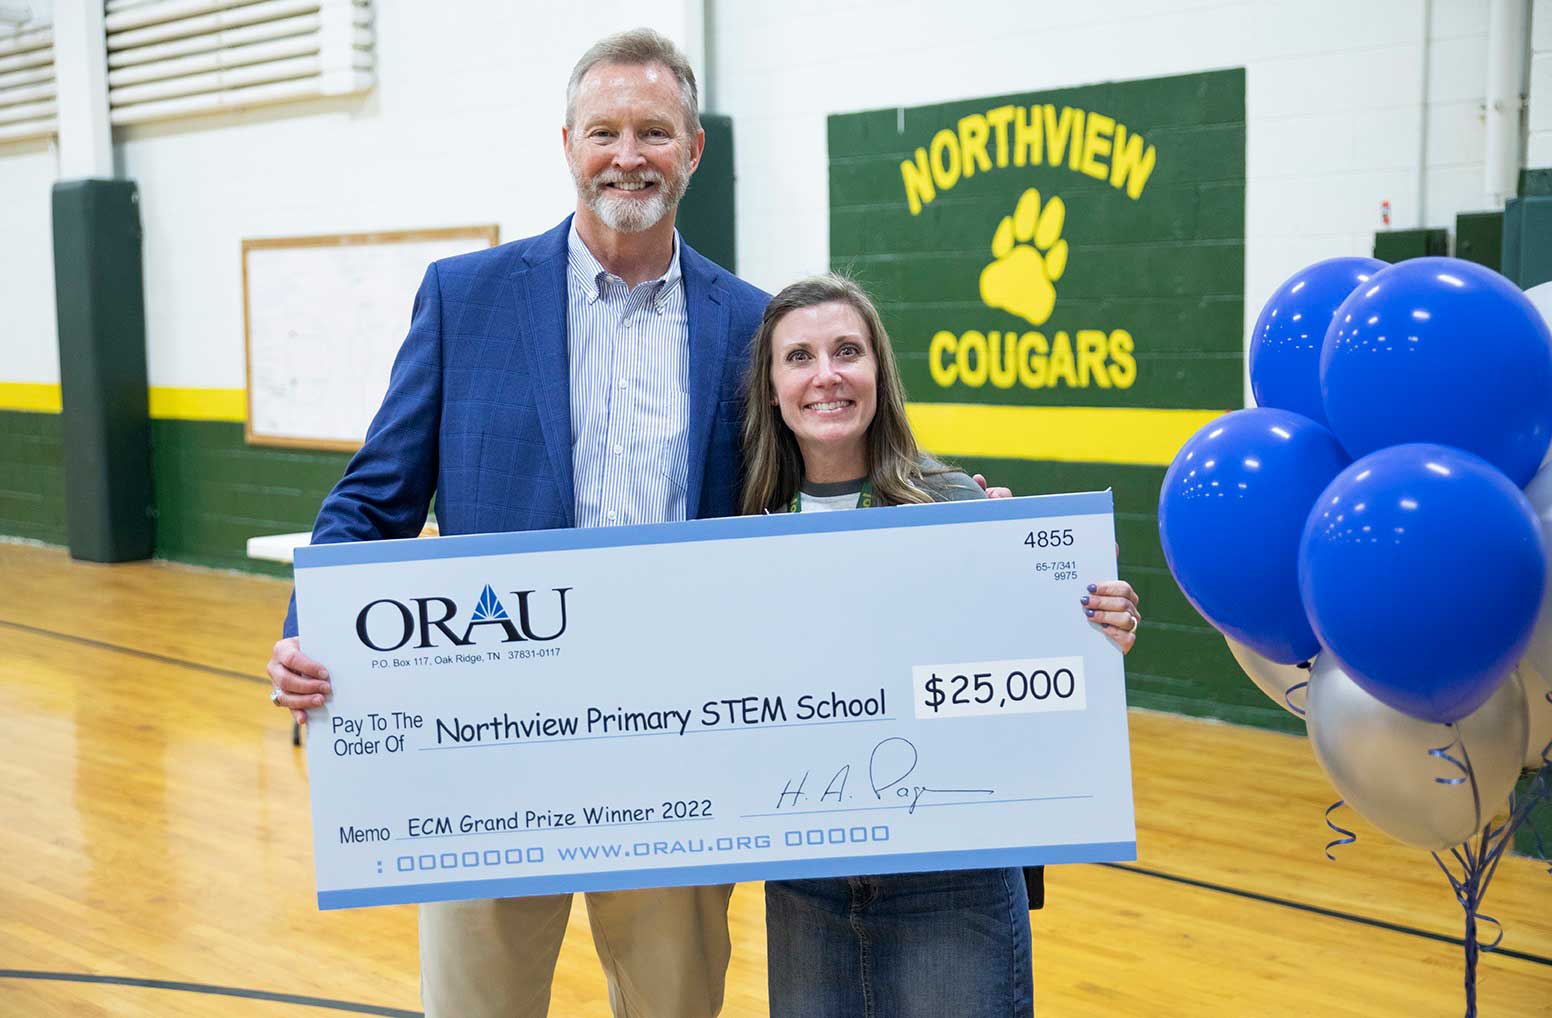 Stacey Whaley, third grade teacher at Northview Primary STEM School in Kodak, Tenn., was named winner of the $25,000 grand prize in ORAU’s 2022 Extreme Classroom Makeover